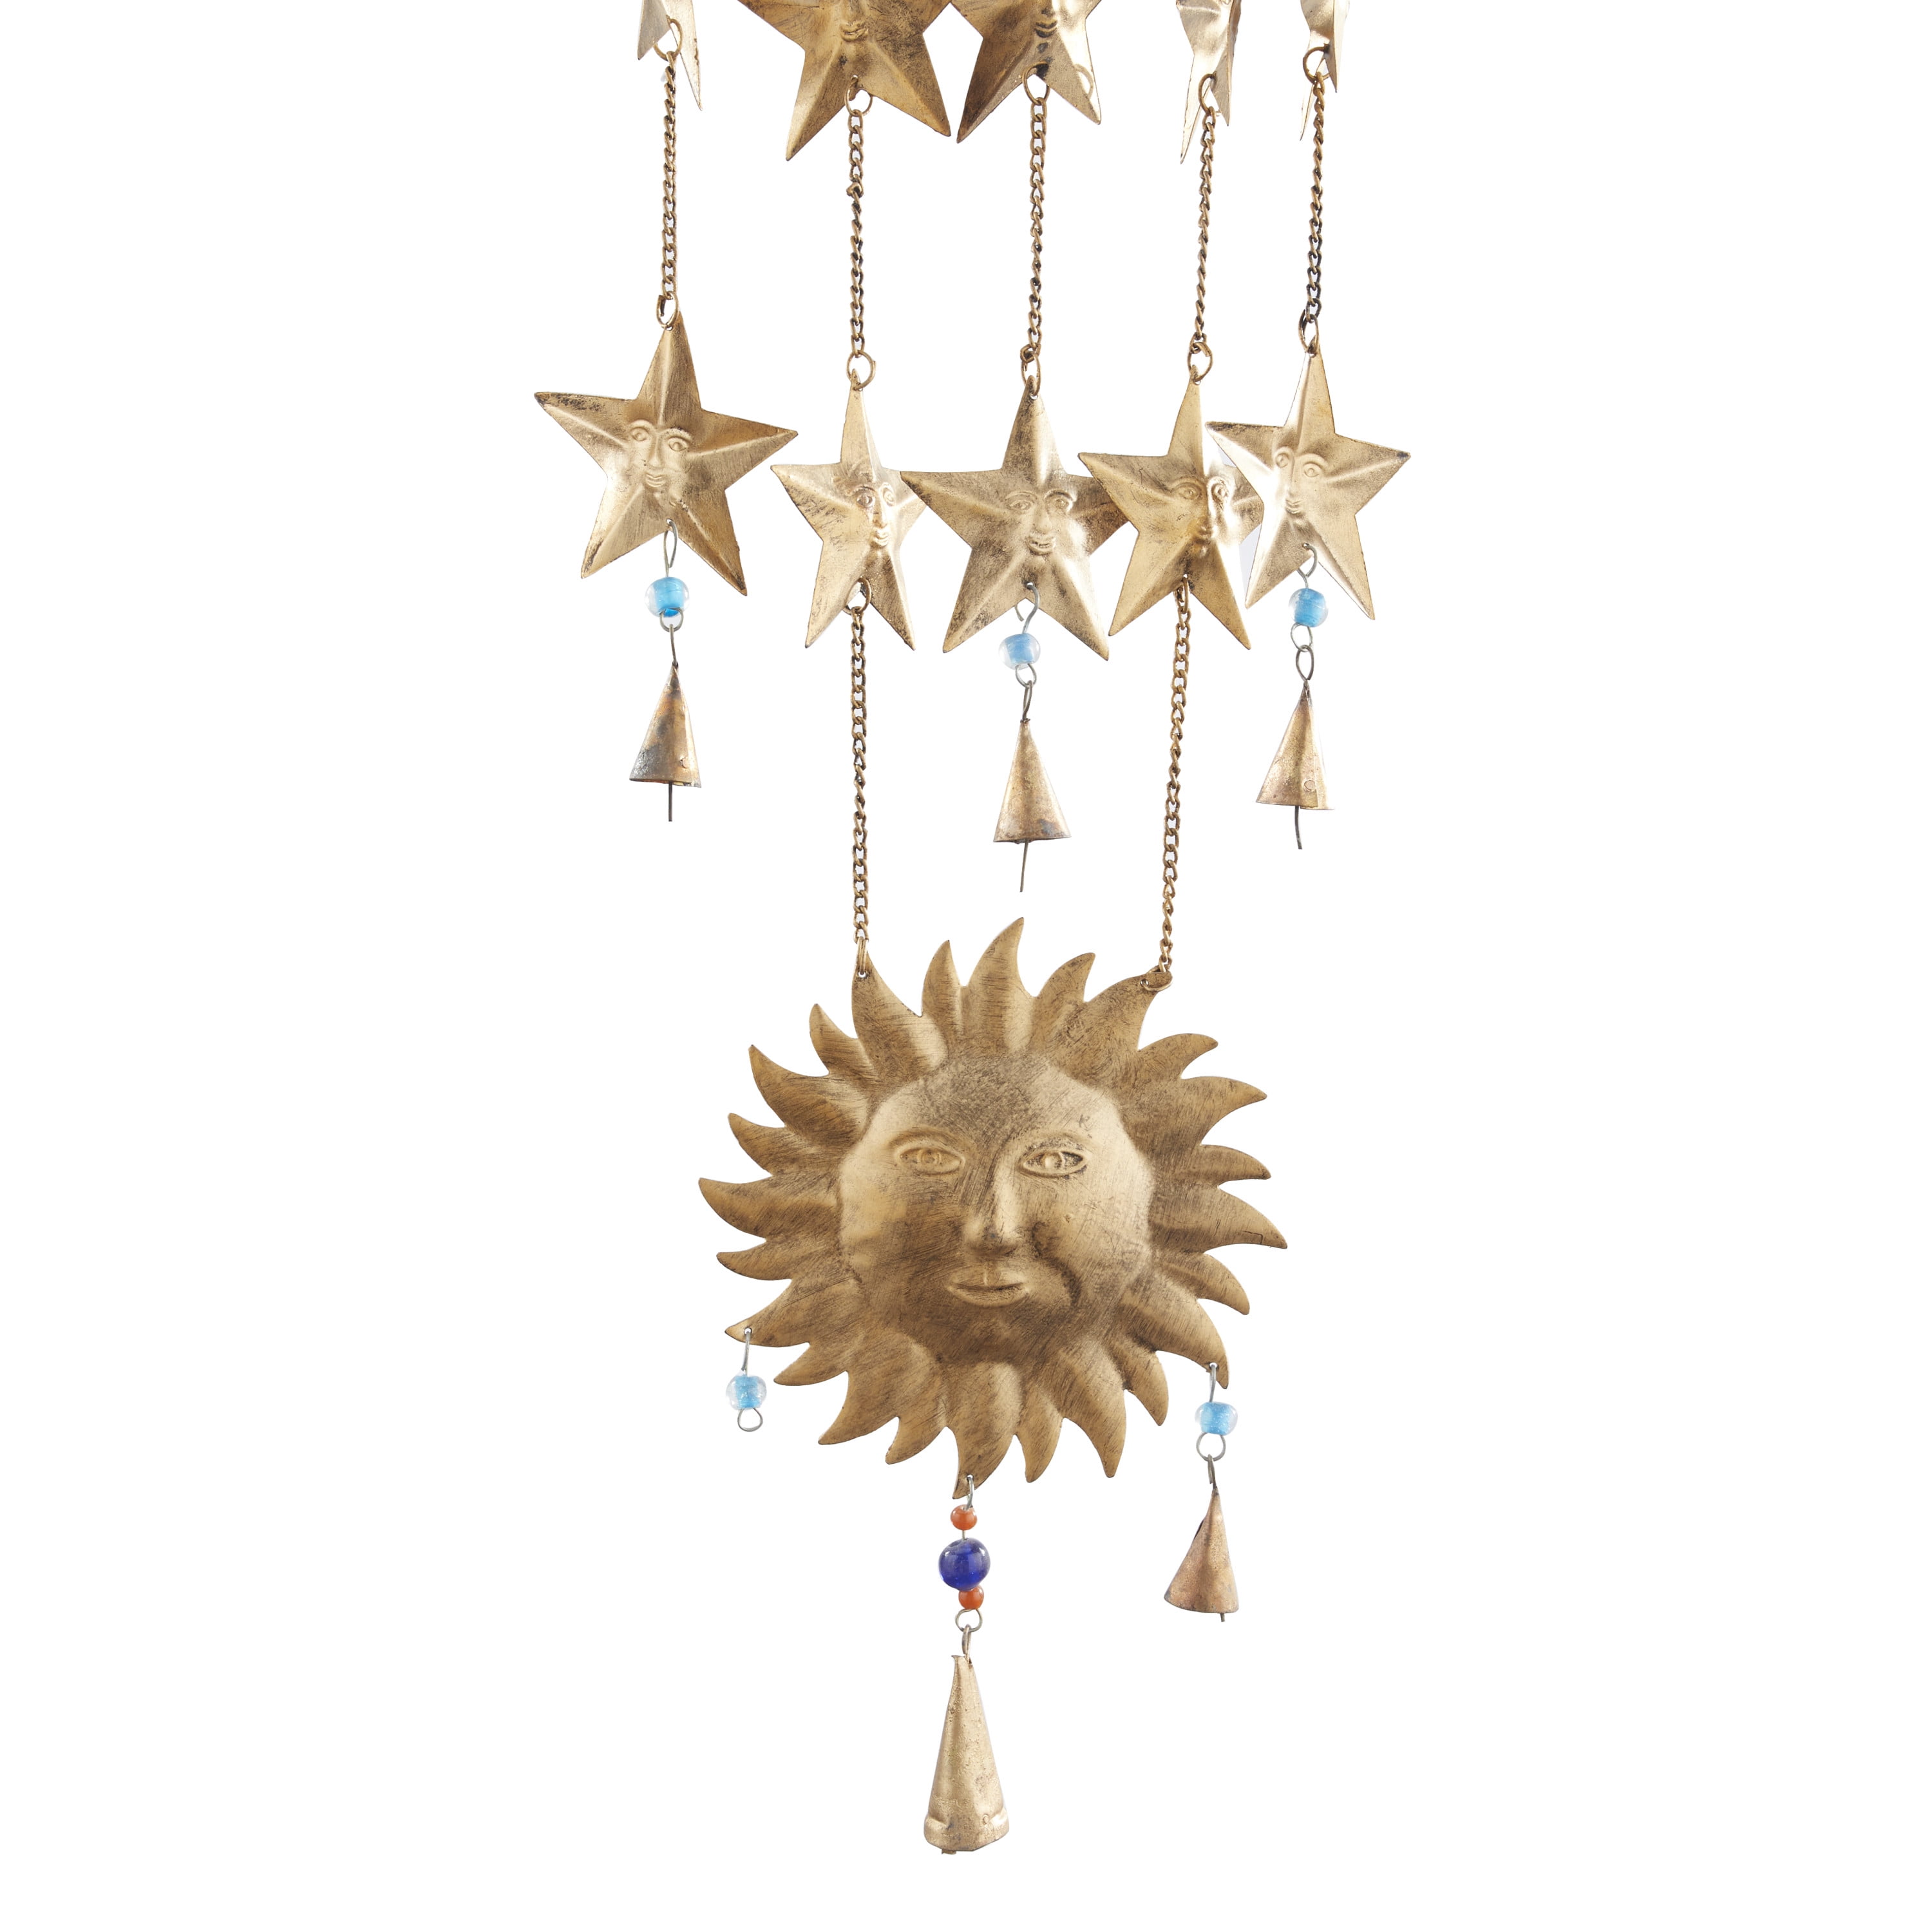 Decmode 39 inch Gold Metal Eclectic Windchime, Size: XL